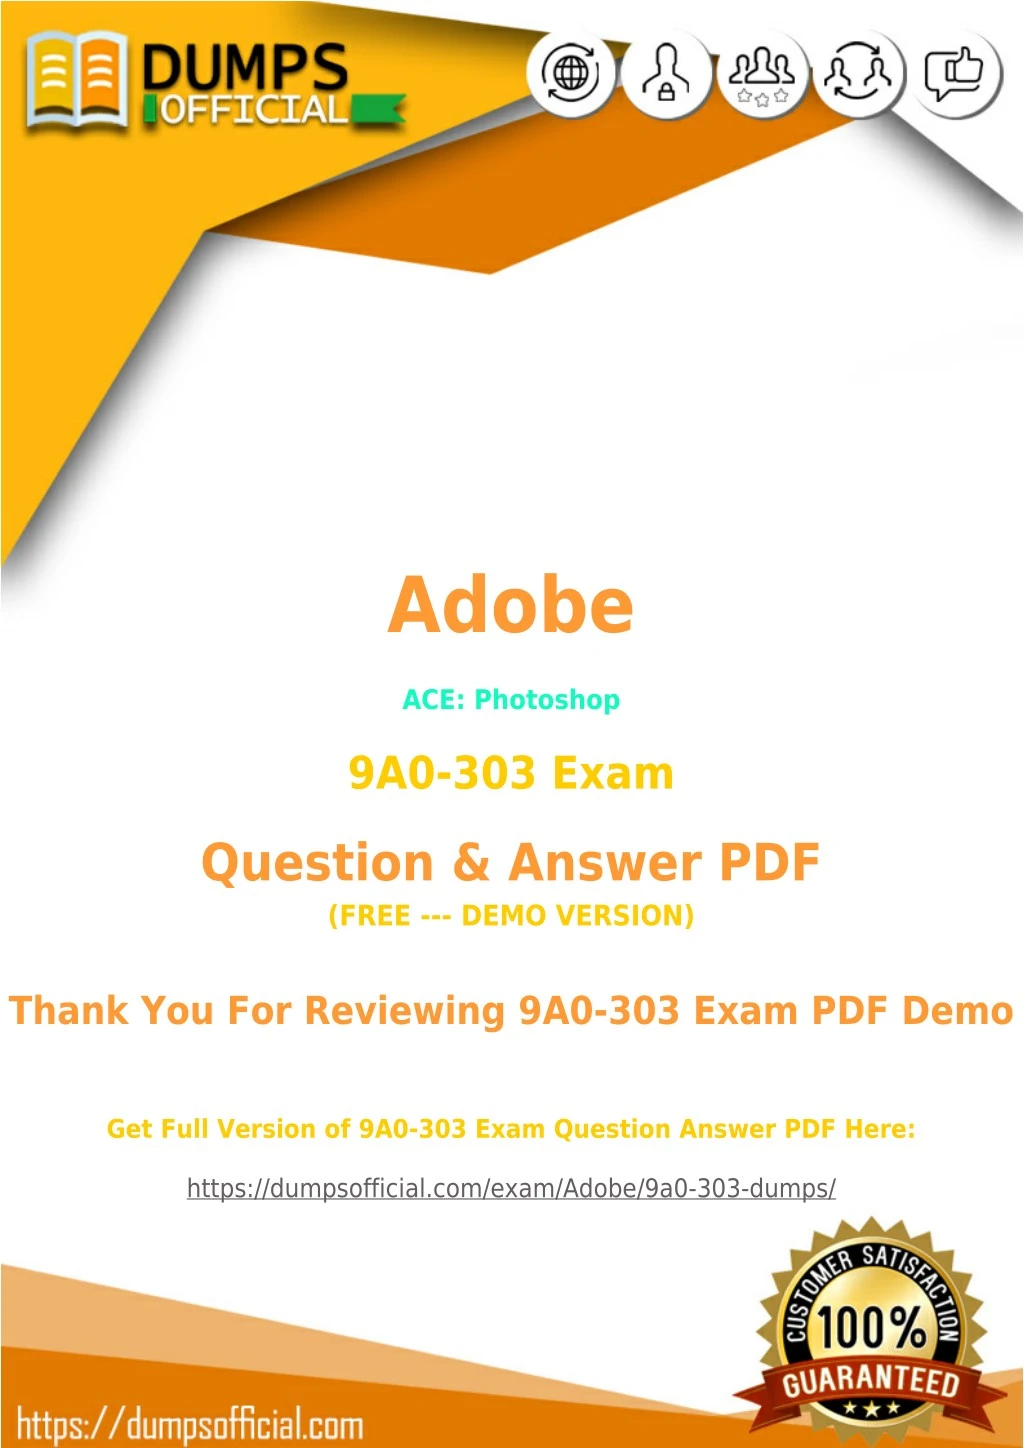 photoshop multiple choice questions and answers pdf download